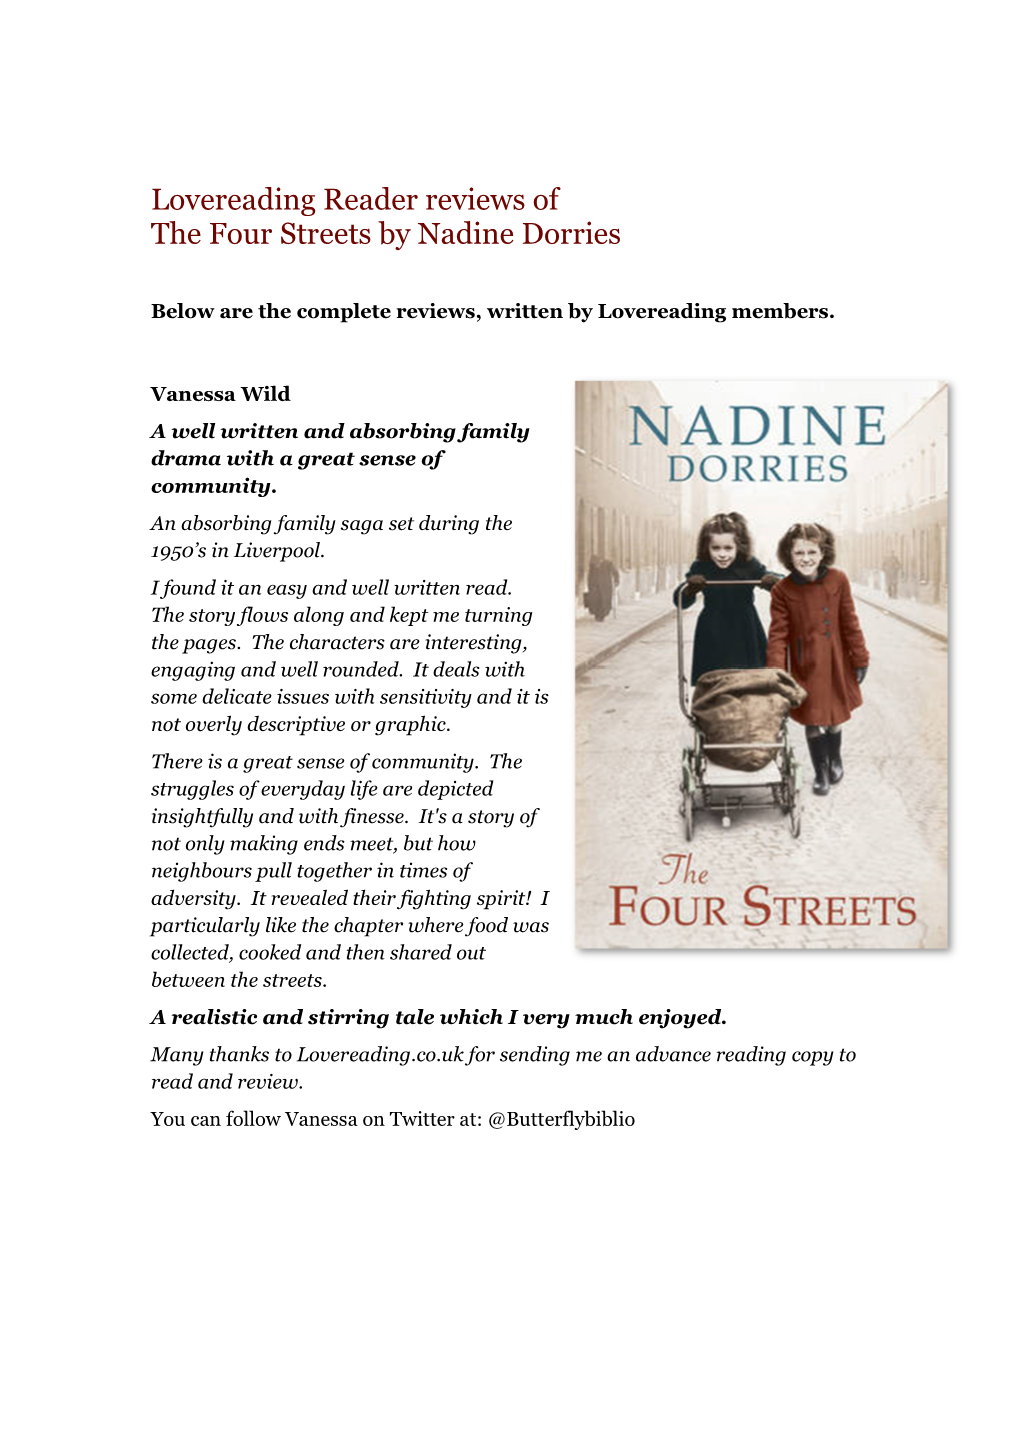 Lovereading Reader Reviews of the Four Streets by Nadine Dorries